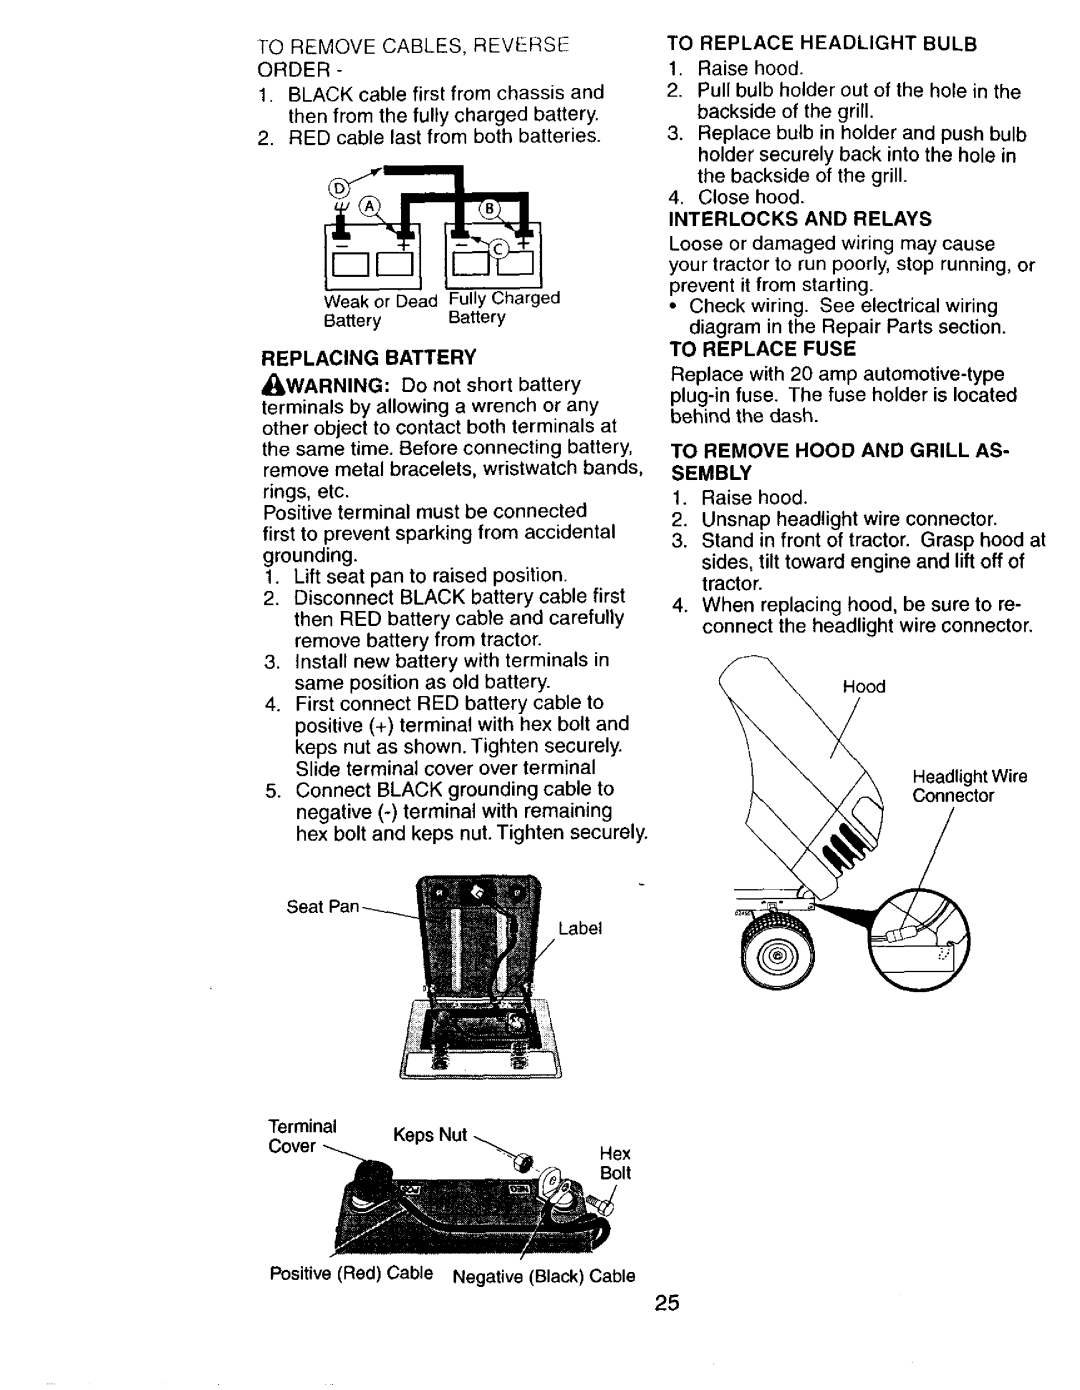 Craftsman 917272673 owner manual To Removecables,Reverse Order, RED cable lastfrom both batteries 